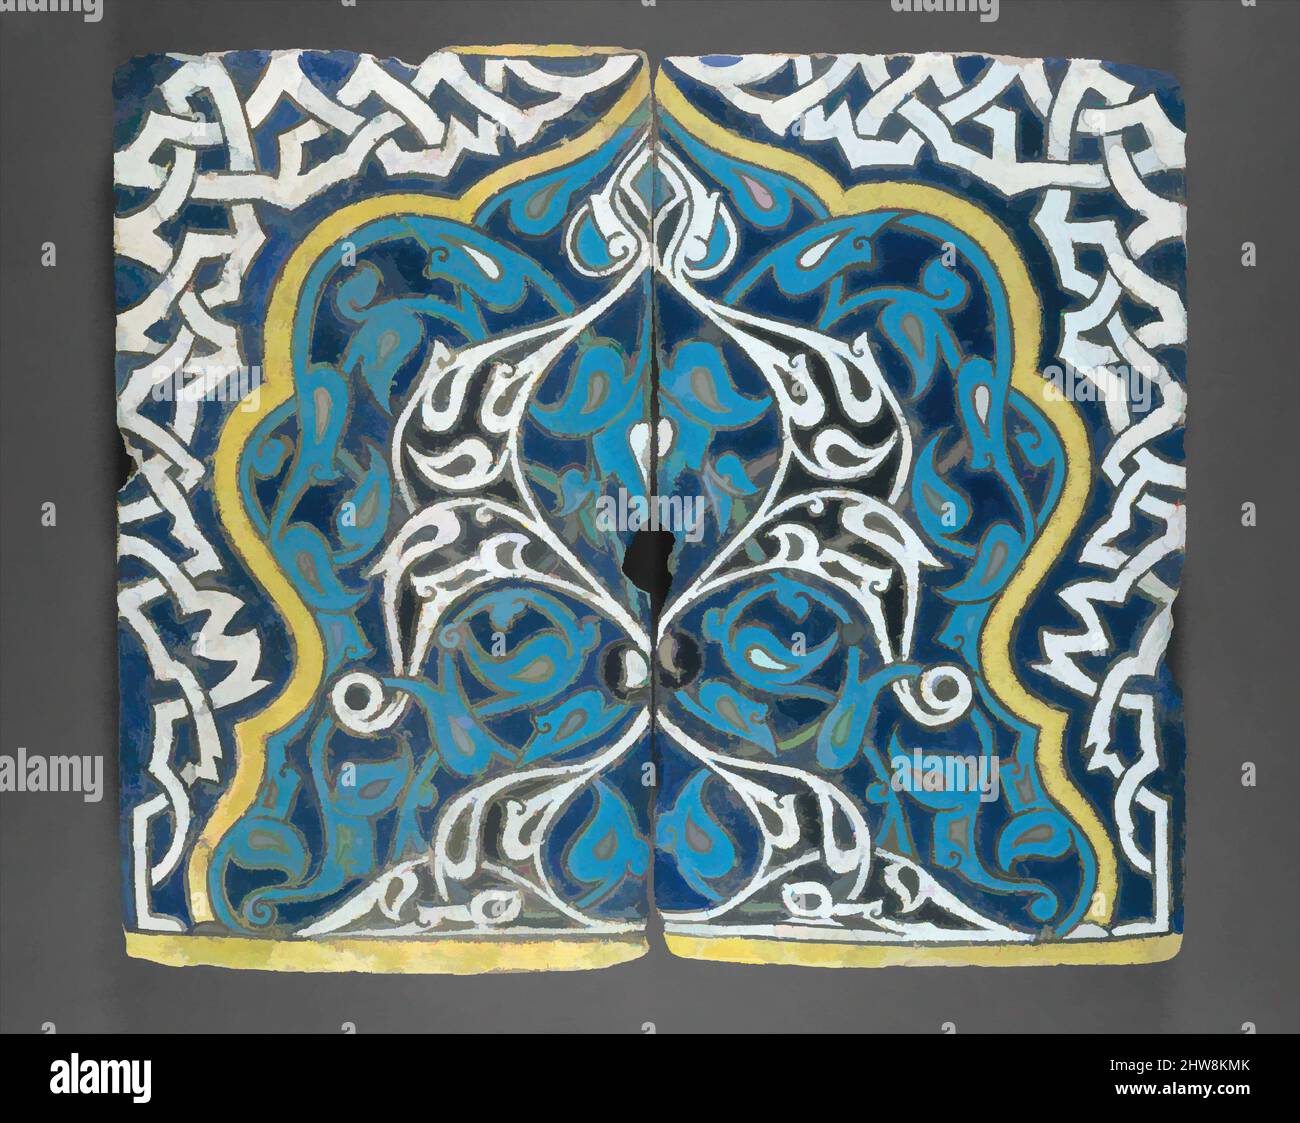 Art inspired by Shaped Tiles in the 'Cuerda Seca' Technique, late 14th century, Attributed to Turkey, Konya, Stonepaste; polychrome glaze within black wax resist outlines (cuerda seca technique), Tile a: H. 18 13/16 in. (47.8 cm), Ceramics-Tiles, A brilliant but short‑lived episode in, Classic works modernized by Artotop with a splash of modernity. Shapes, color and value, eye-catching visual impact on art. Emotions through freedom of artworks in a contemporary way. A timeless message pursuing a wildly creative new direction. Artists turning to the digital medium and creating the Artotop NFT Stock Photo